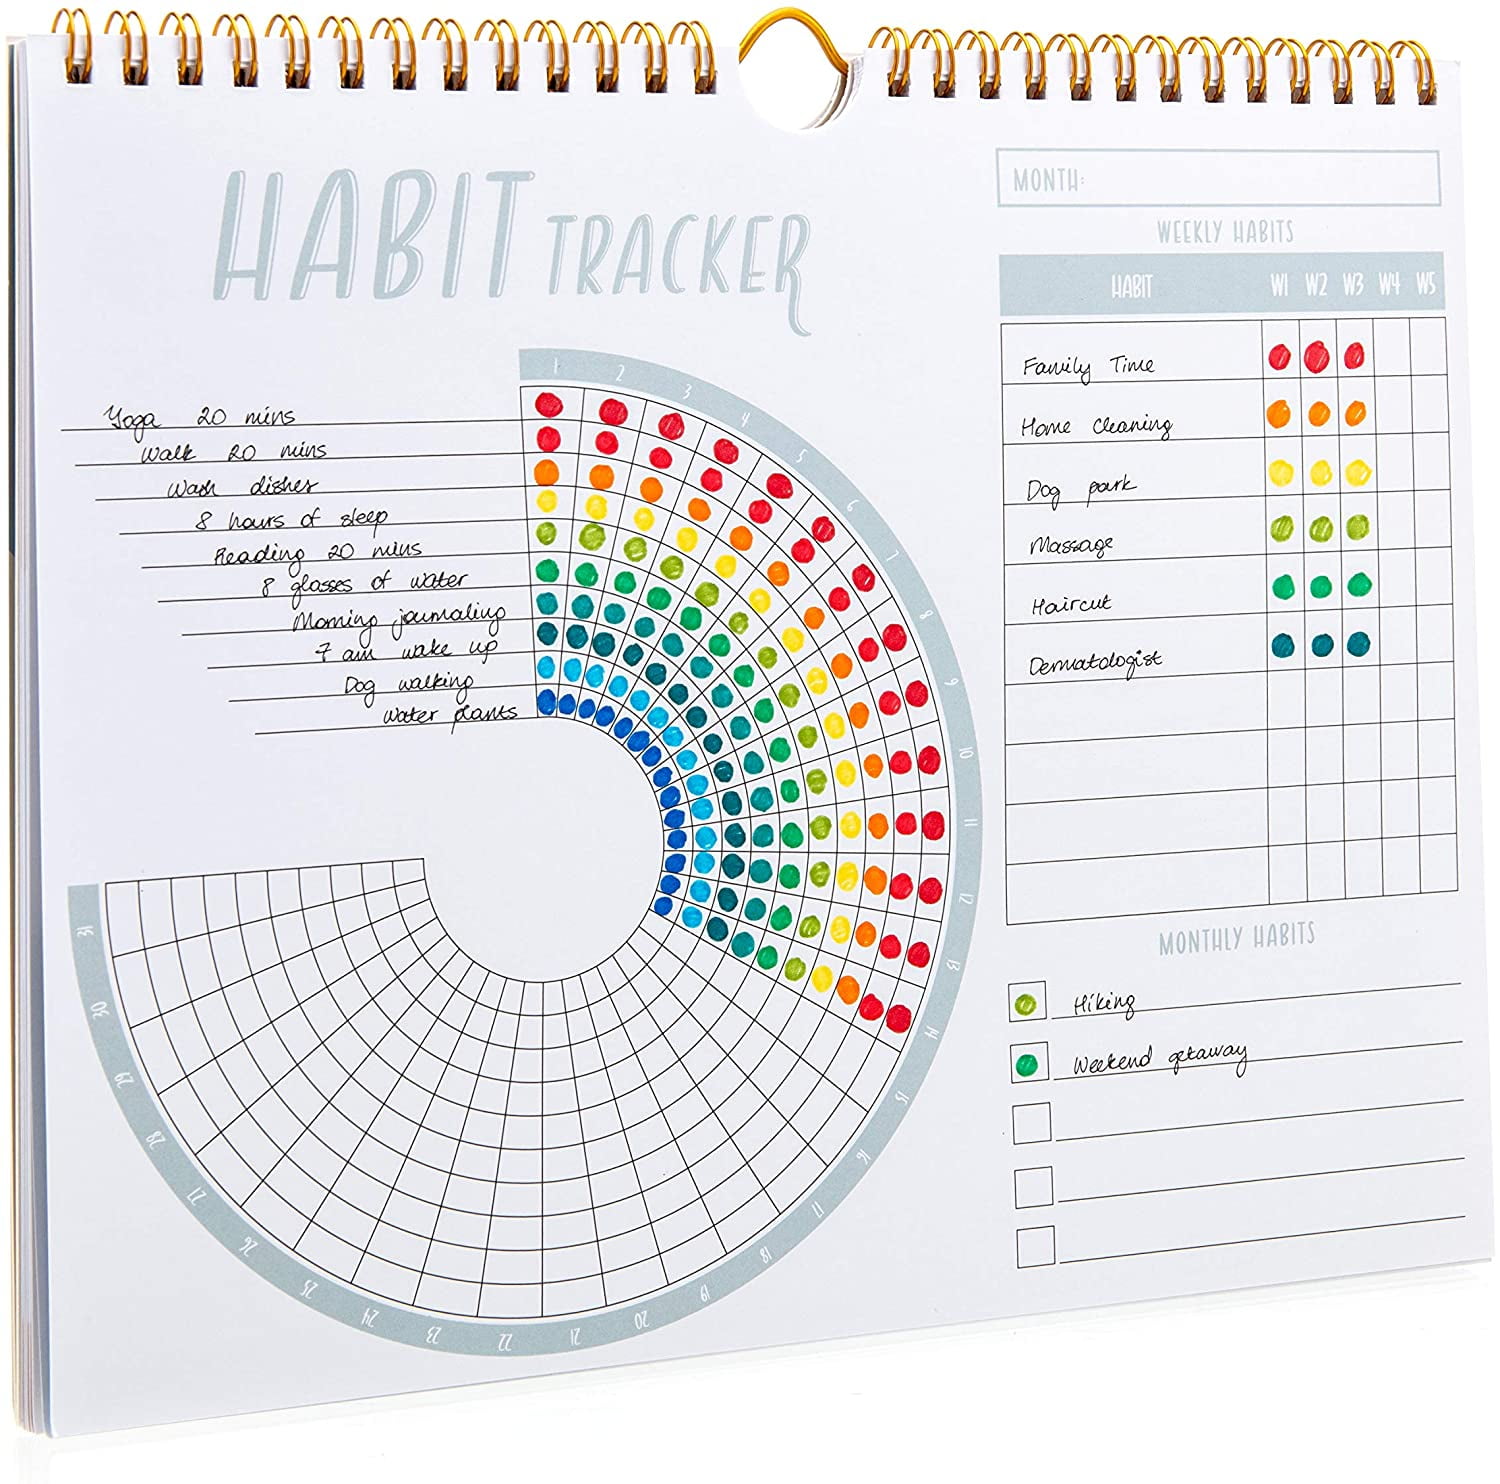 Motivational Habit Tracking Journal 8.5 x 11.8 Twin-Wire Binding Undated 12+2 Month Journal for Wide Applications with Premium Paper Habit Tracker Habit Tracker Calendar Coloful 